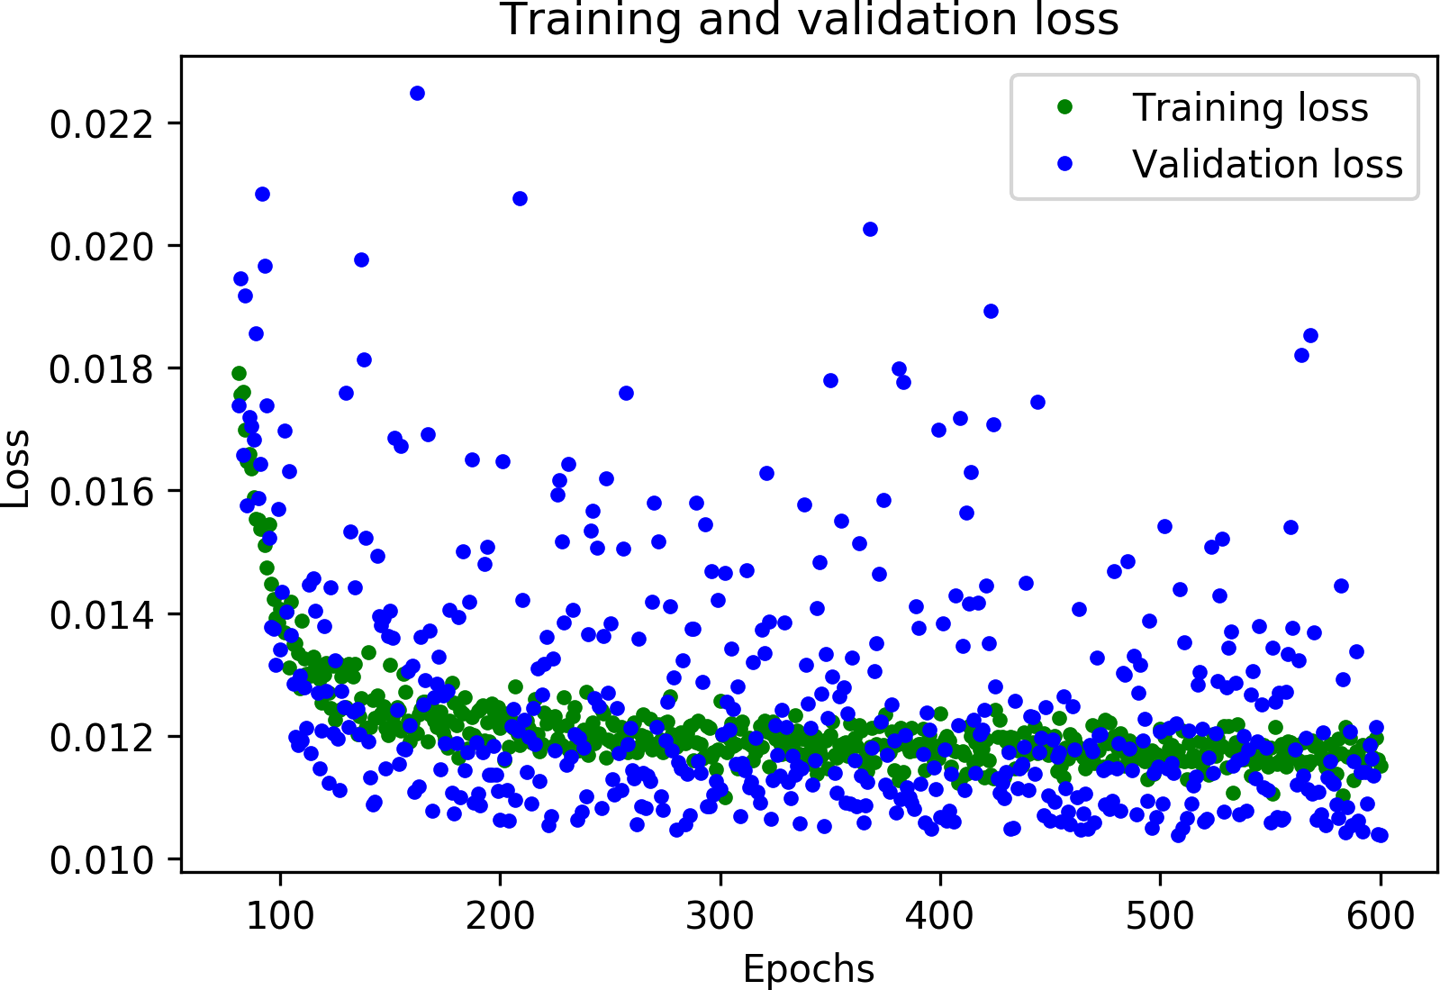 A graph of training and validation loss, skipping the first 100 epochs